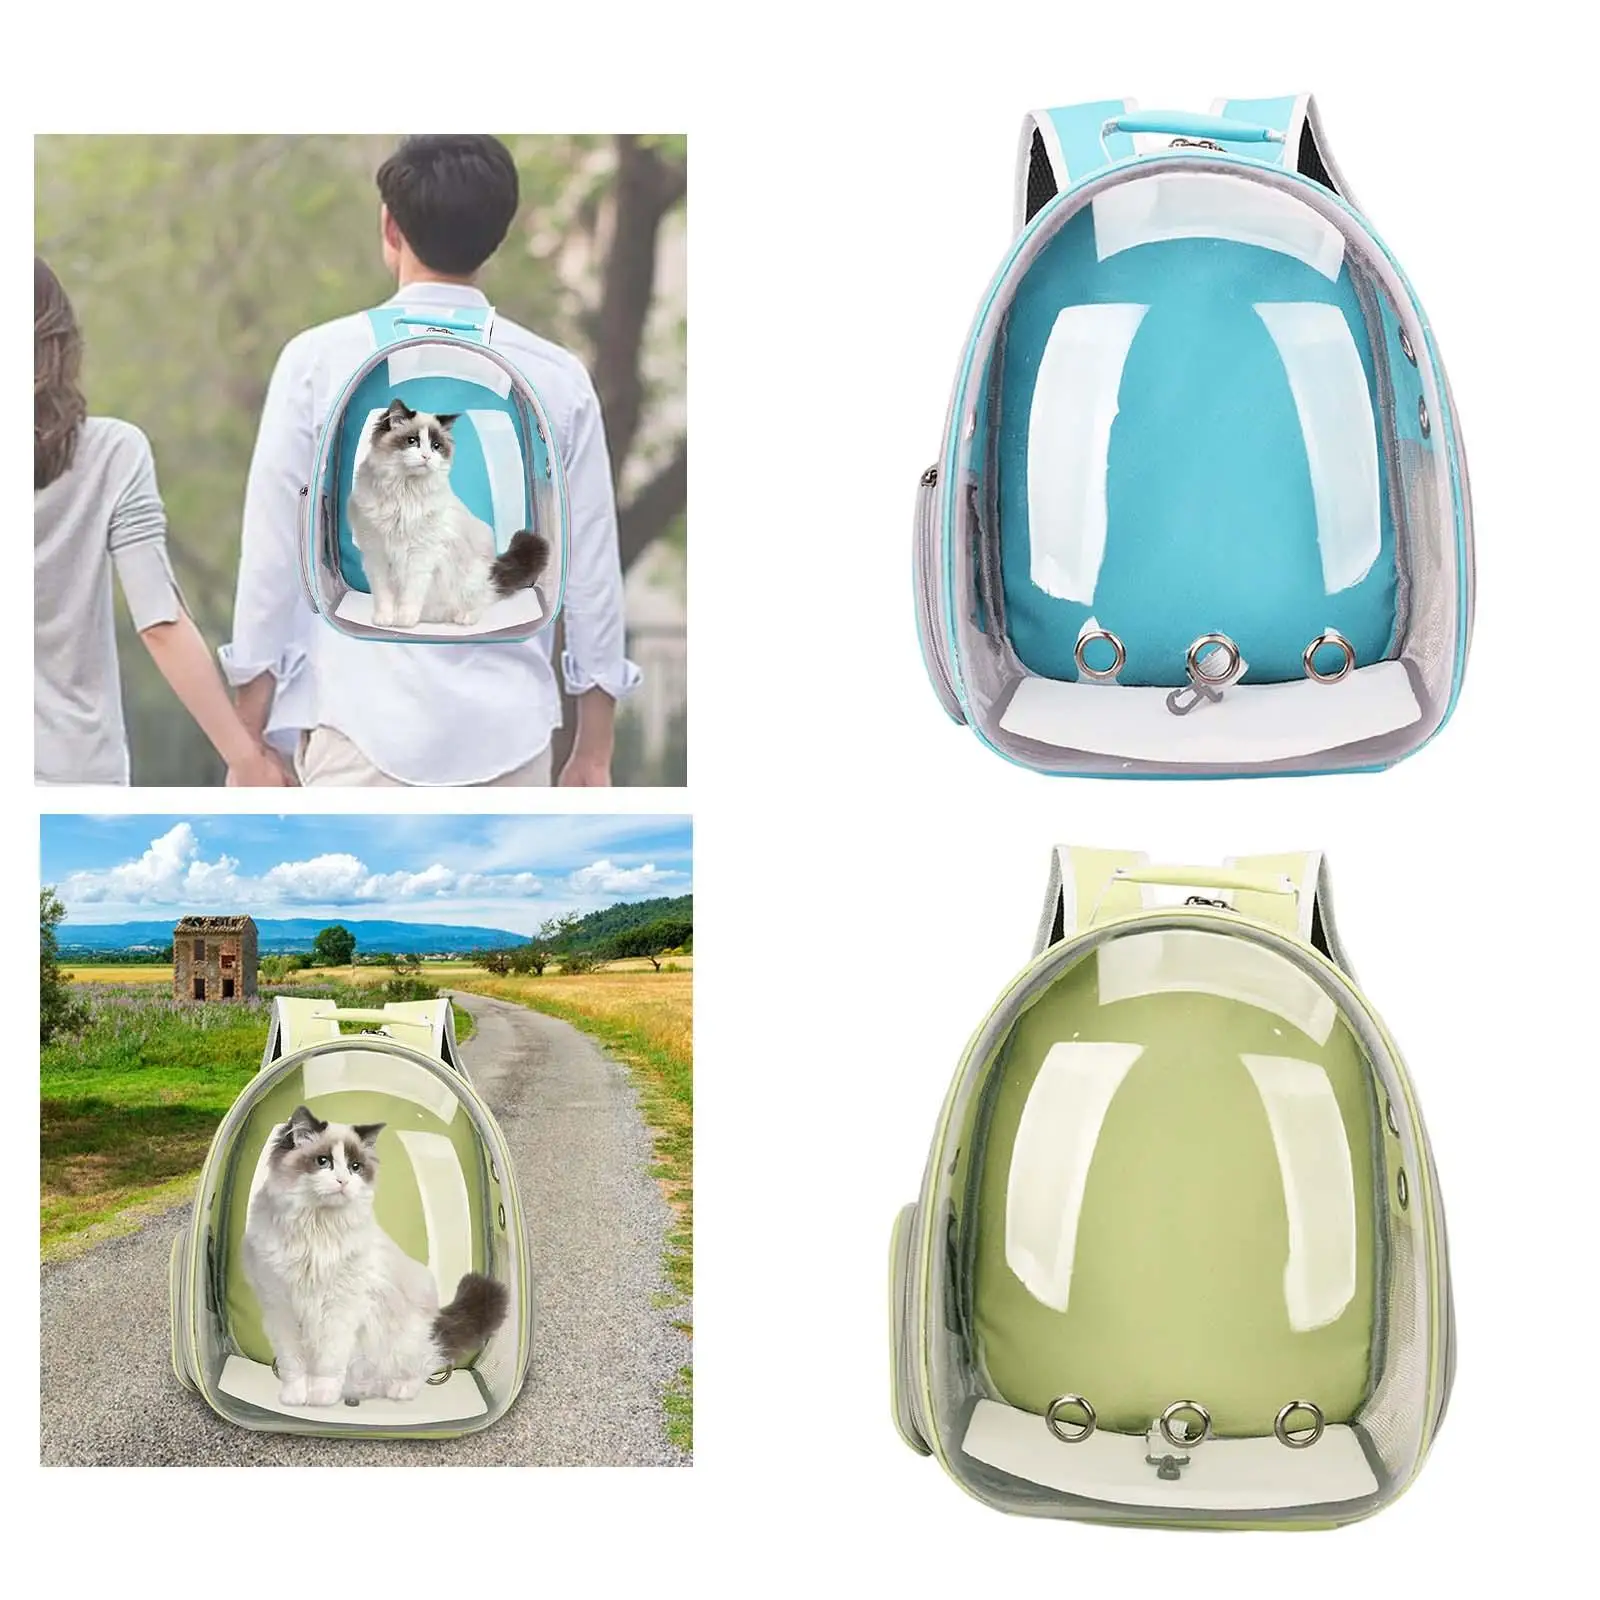 Pet Cat Carrier Backpack Ventilation Small Space Travel Bag Small Dog Backpack Carrier Pet Travel Bag for Hiking Outdoor Travel